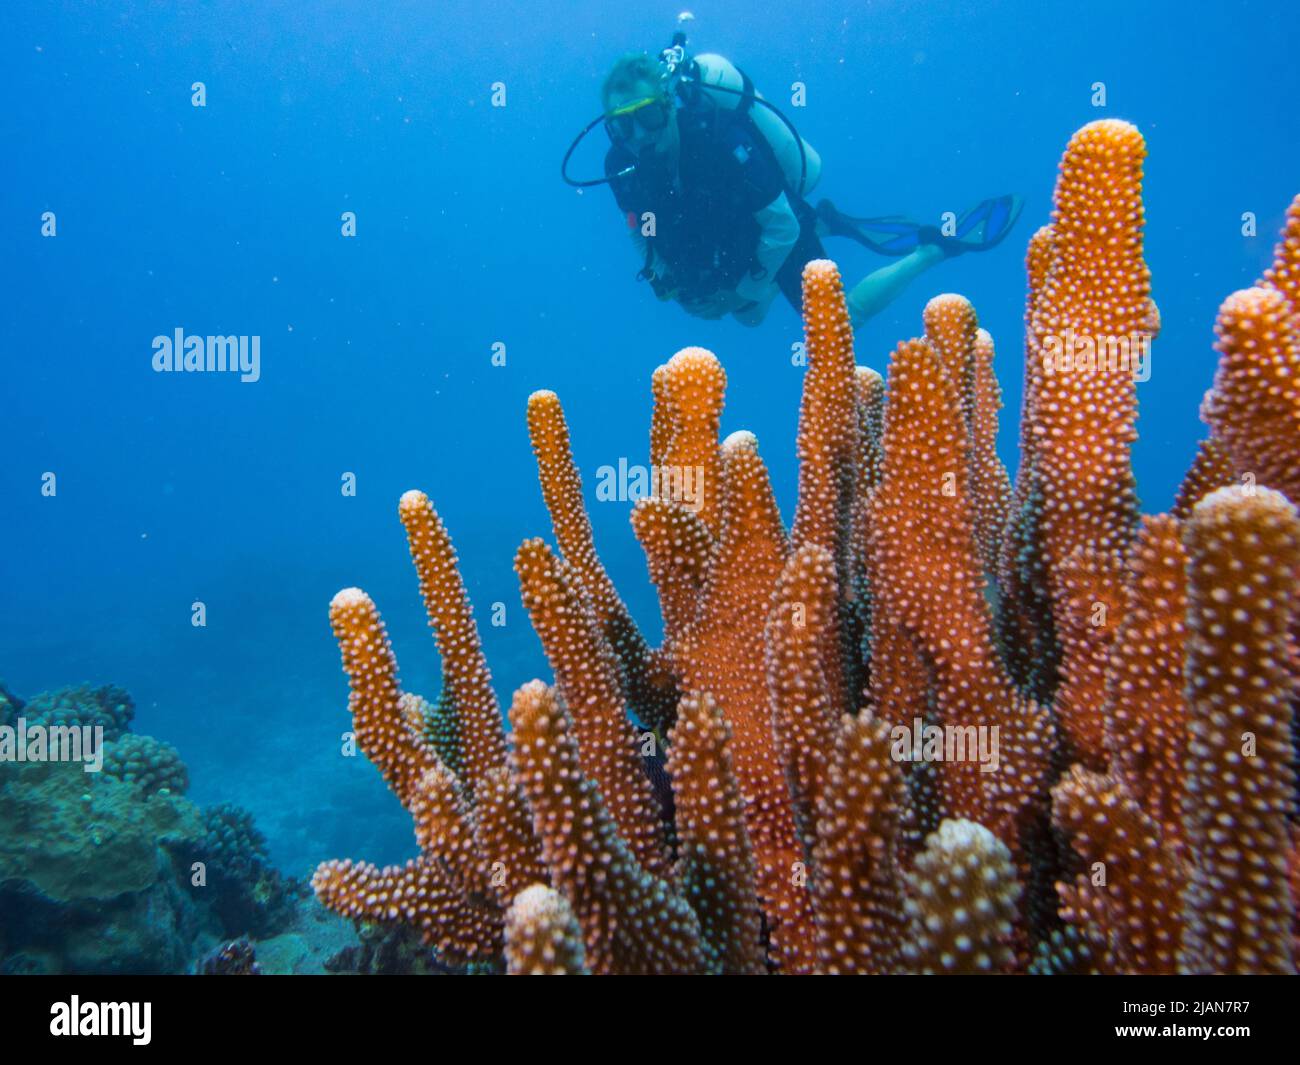 Scuba diver with coral at Ana'a atoll in the clear water of the Tuamotus, French Polynesia Stock Photo